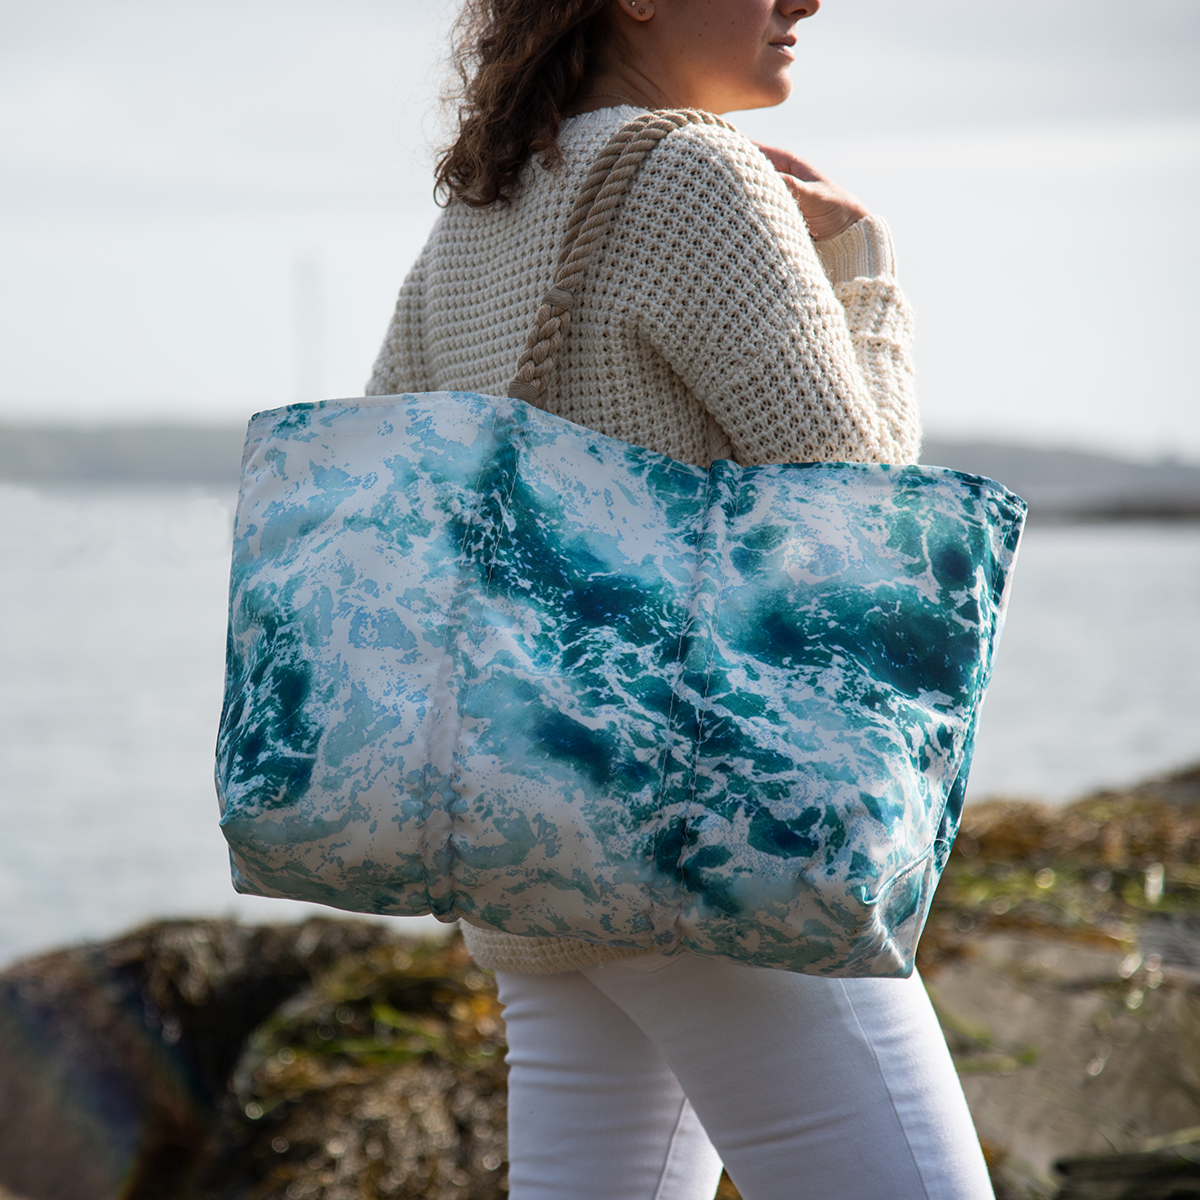 Surf Tote